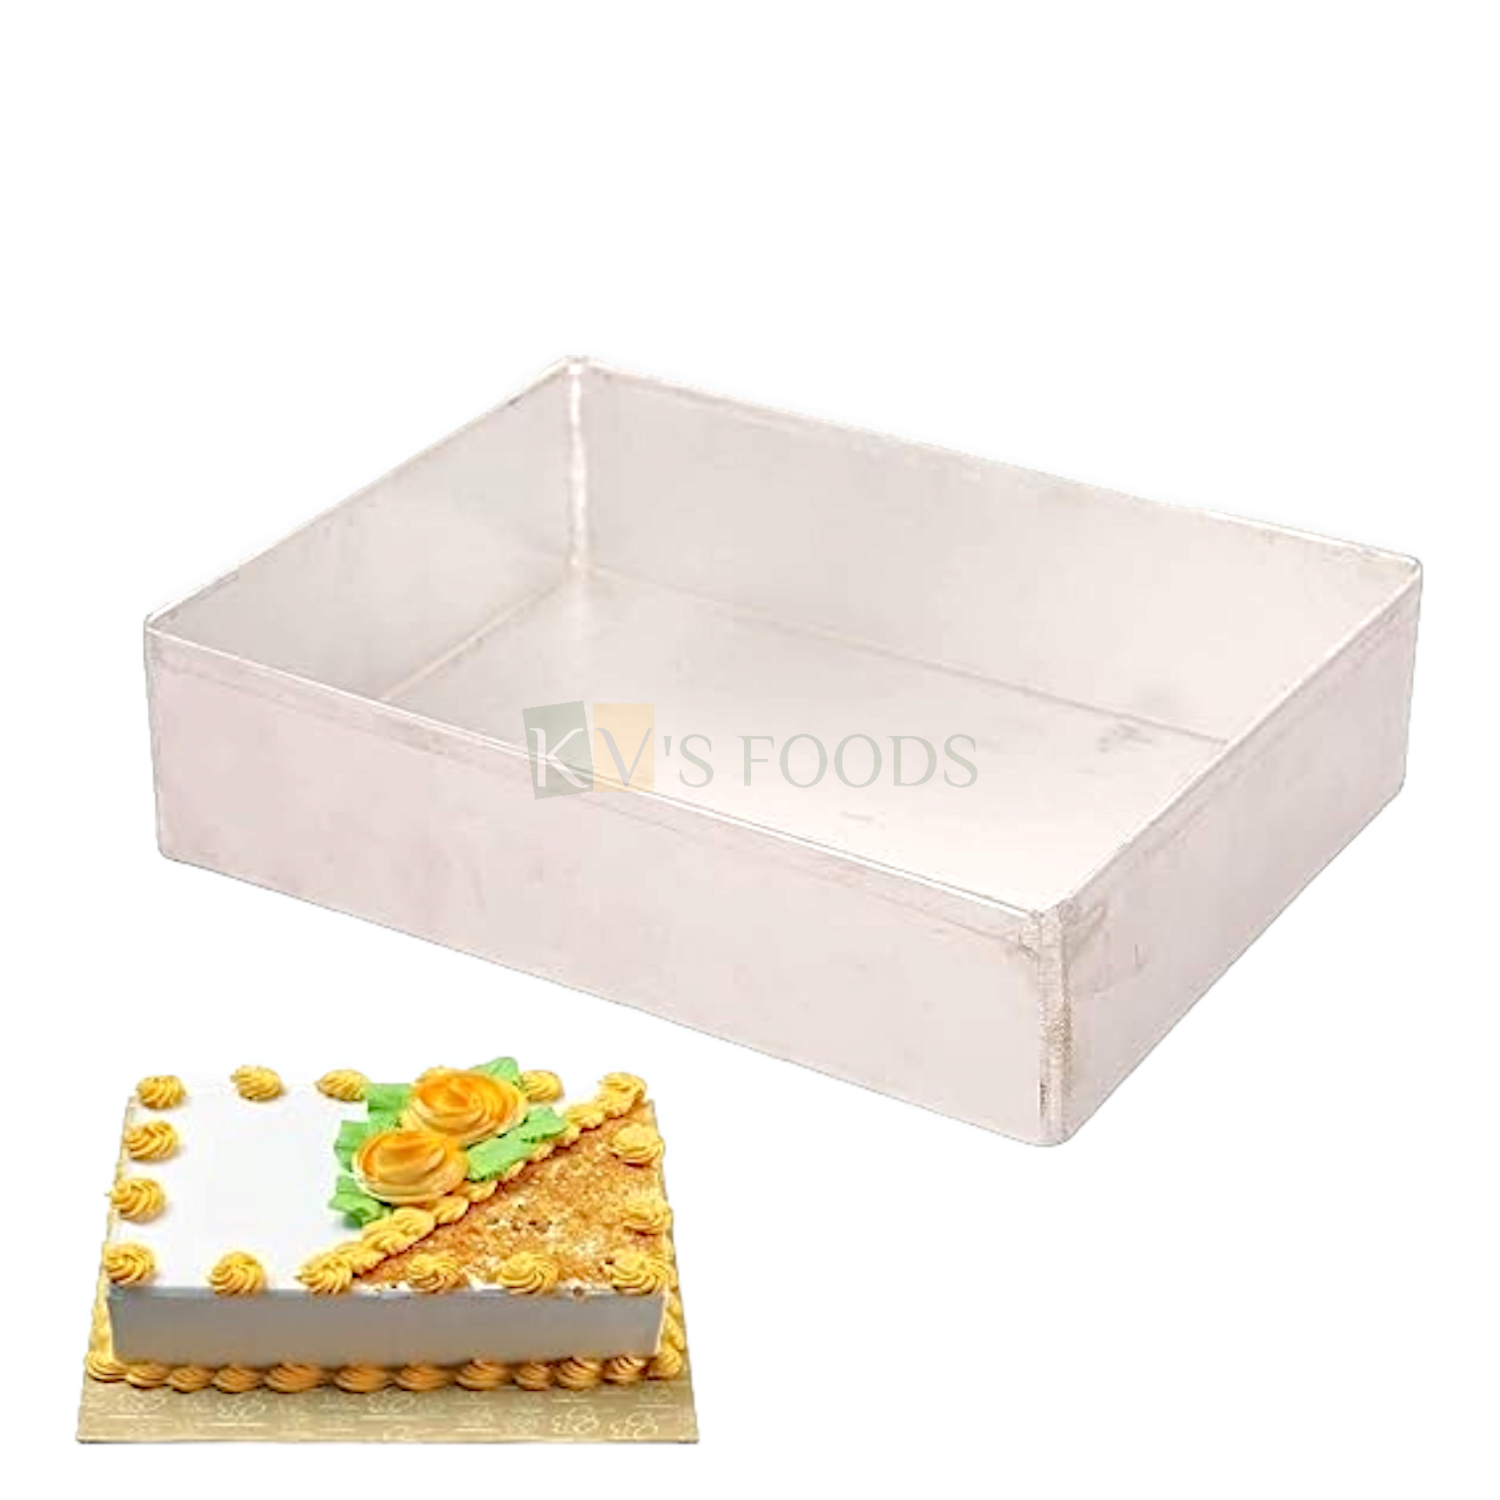 1PC Size 11 x 9 x 2 Inch Capacity ~2 Kg Aluminium Baking Pan Silver Rectangle Big Loaf Bread Mould Bakeware Mousse Pudding Cheese Fruit Chocolate Cakes Containers Mold Tins Tray for Ovens